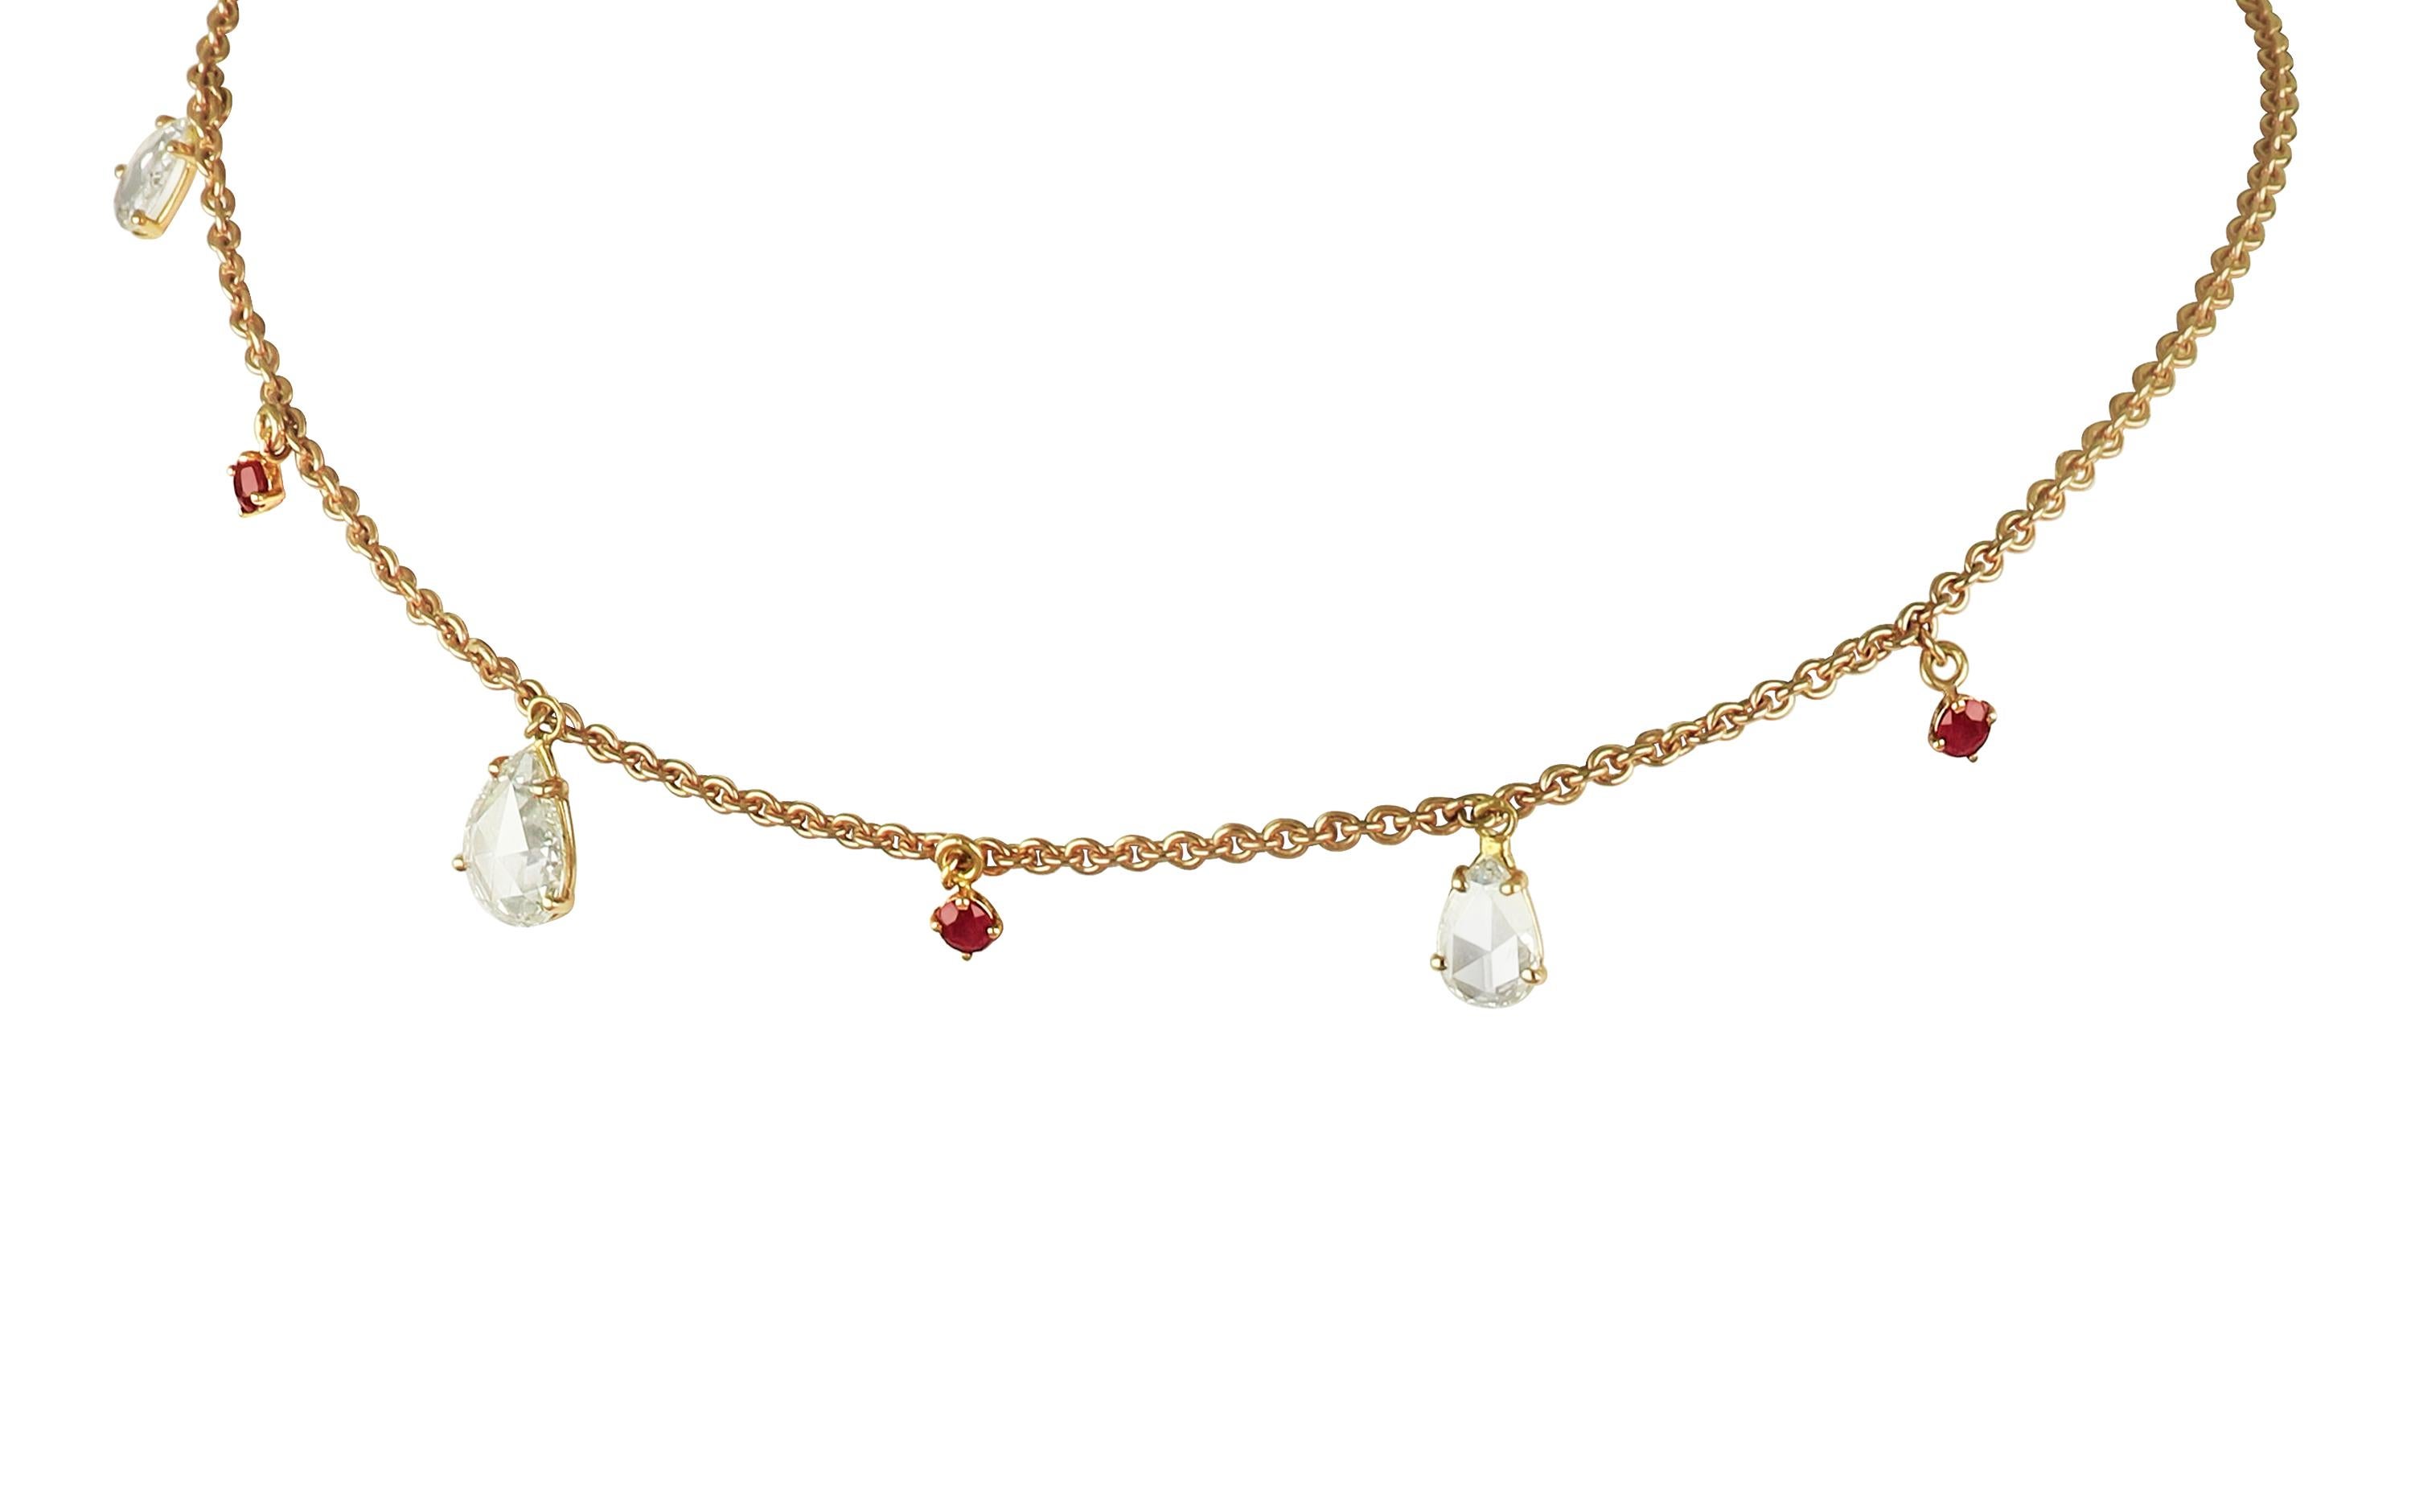 Beautifully designed for complete comfort, the design of Amwaj 18 karat rose gold drops choker is a contemporary classic. Pear shape rose cut diamonds suspend from delicate rose gold chain that encircles the neck, with round ruby nestled between